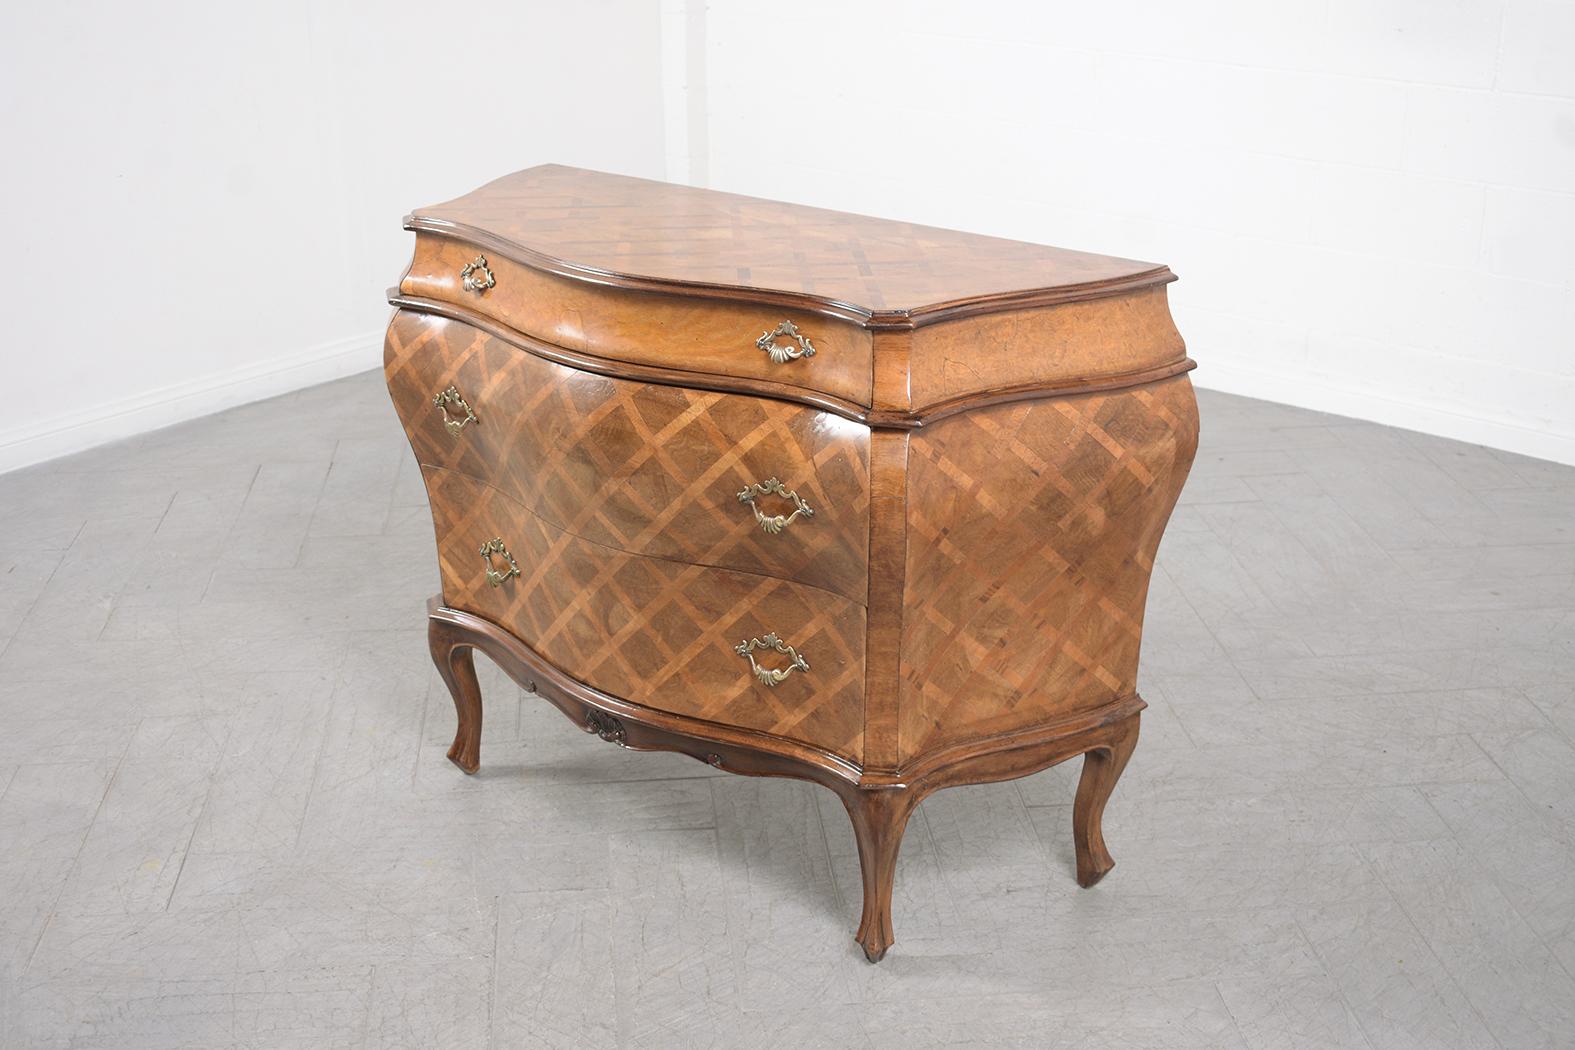 Elevate your interiors with our beautifully restored Italian Vintage Commode – a piece that seamlessly merges craftsmanship and elegance. Meticulously crafted from high-quality wood and enriched with detailed marquetry veneers, this Bombay chest